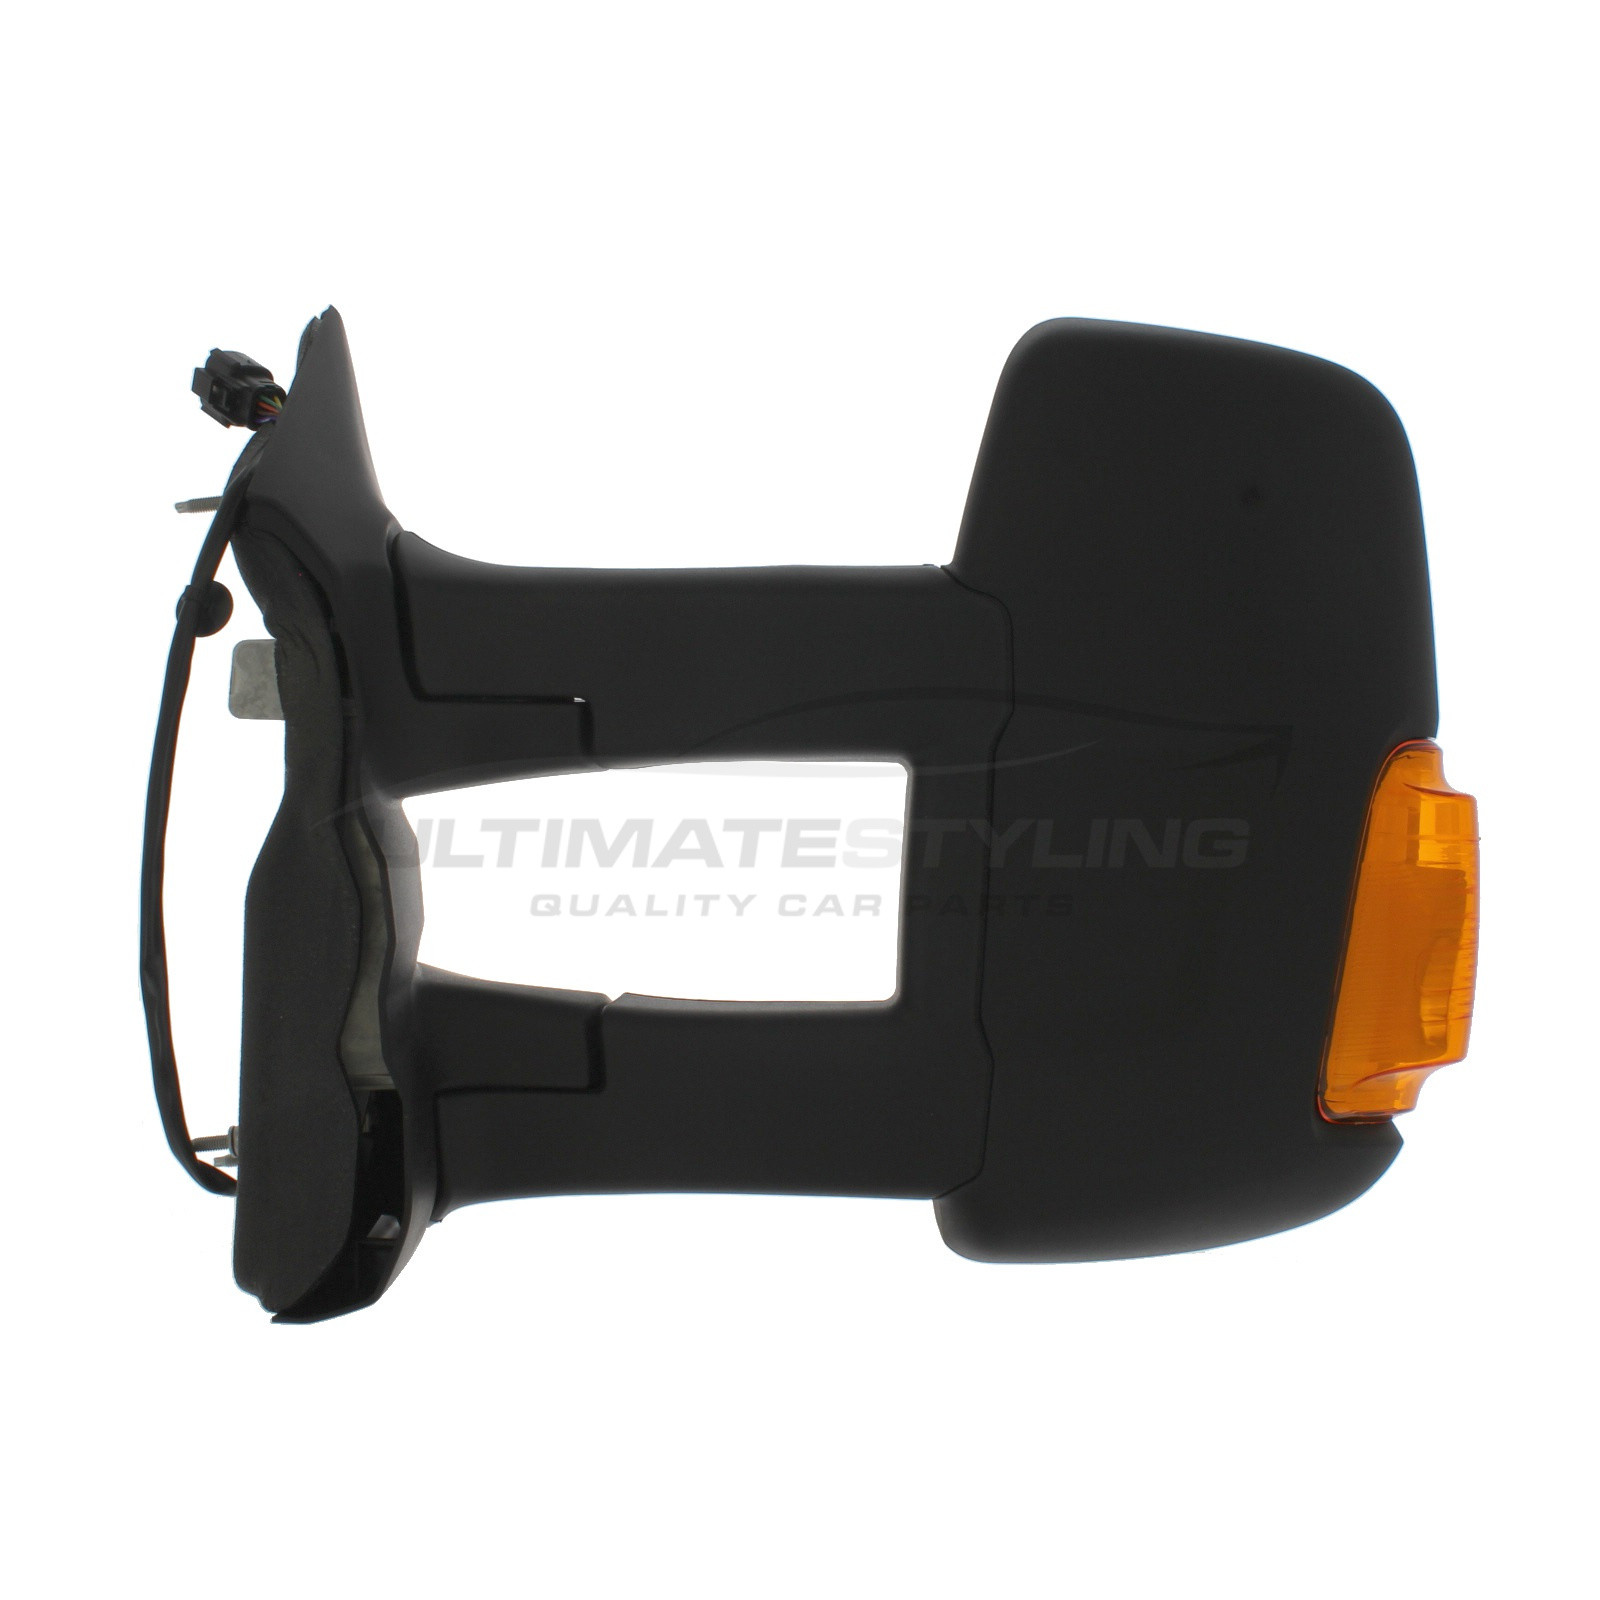 Ford Transit Wing Mirror / Door Mirror - Passenger Side (LH) - Electric adjustment - Heated Glass - Indicator - Black - Textured